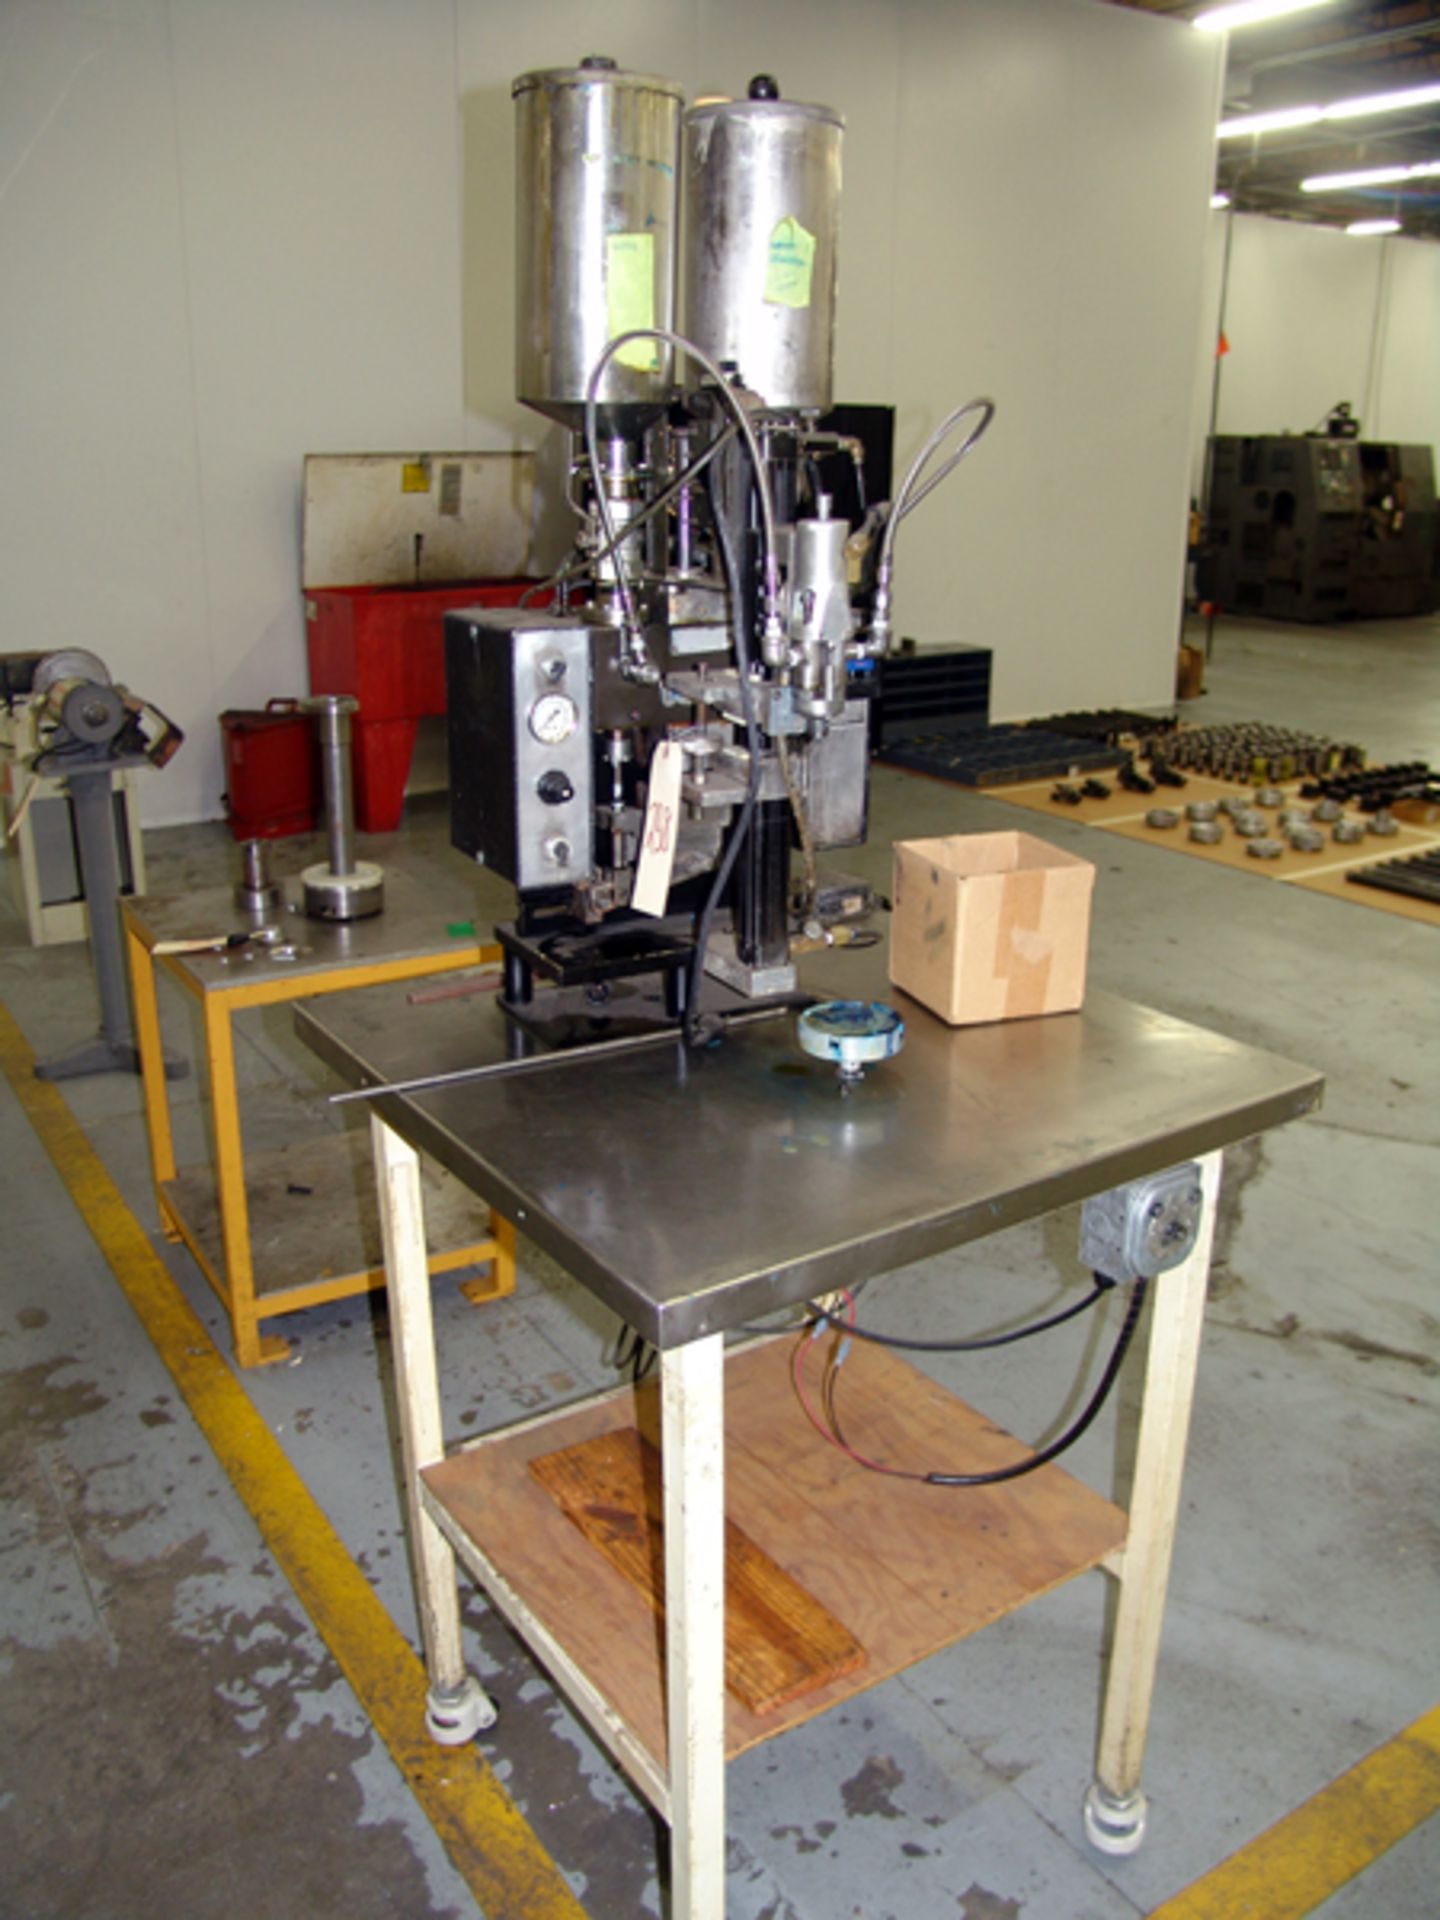 TWINFLOW "Mini II" Variable Ratio Metering, Mixing and Dispensing Machine - Image 2 of 6